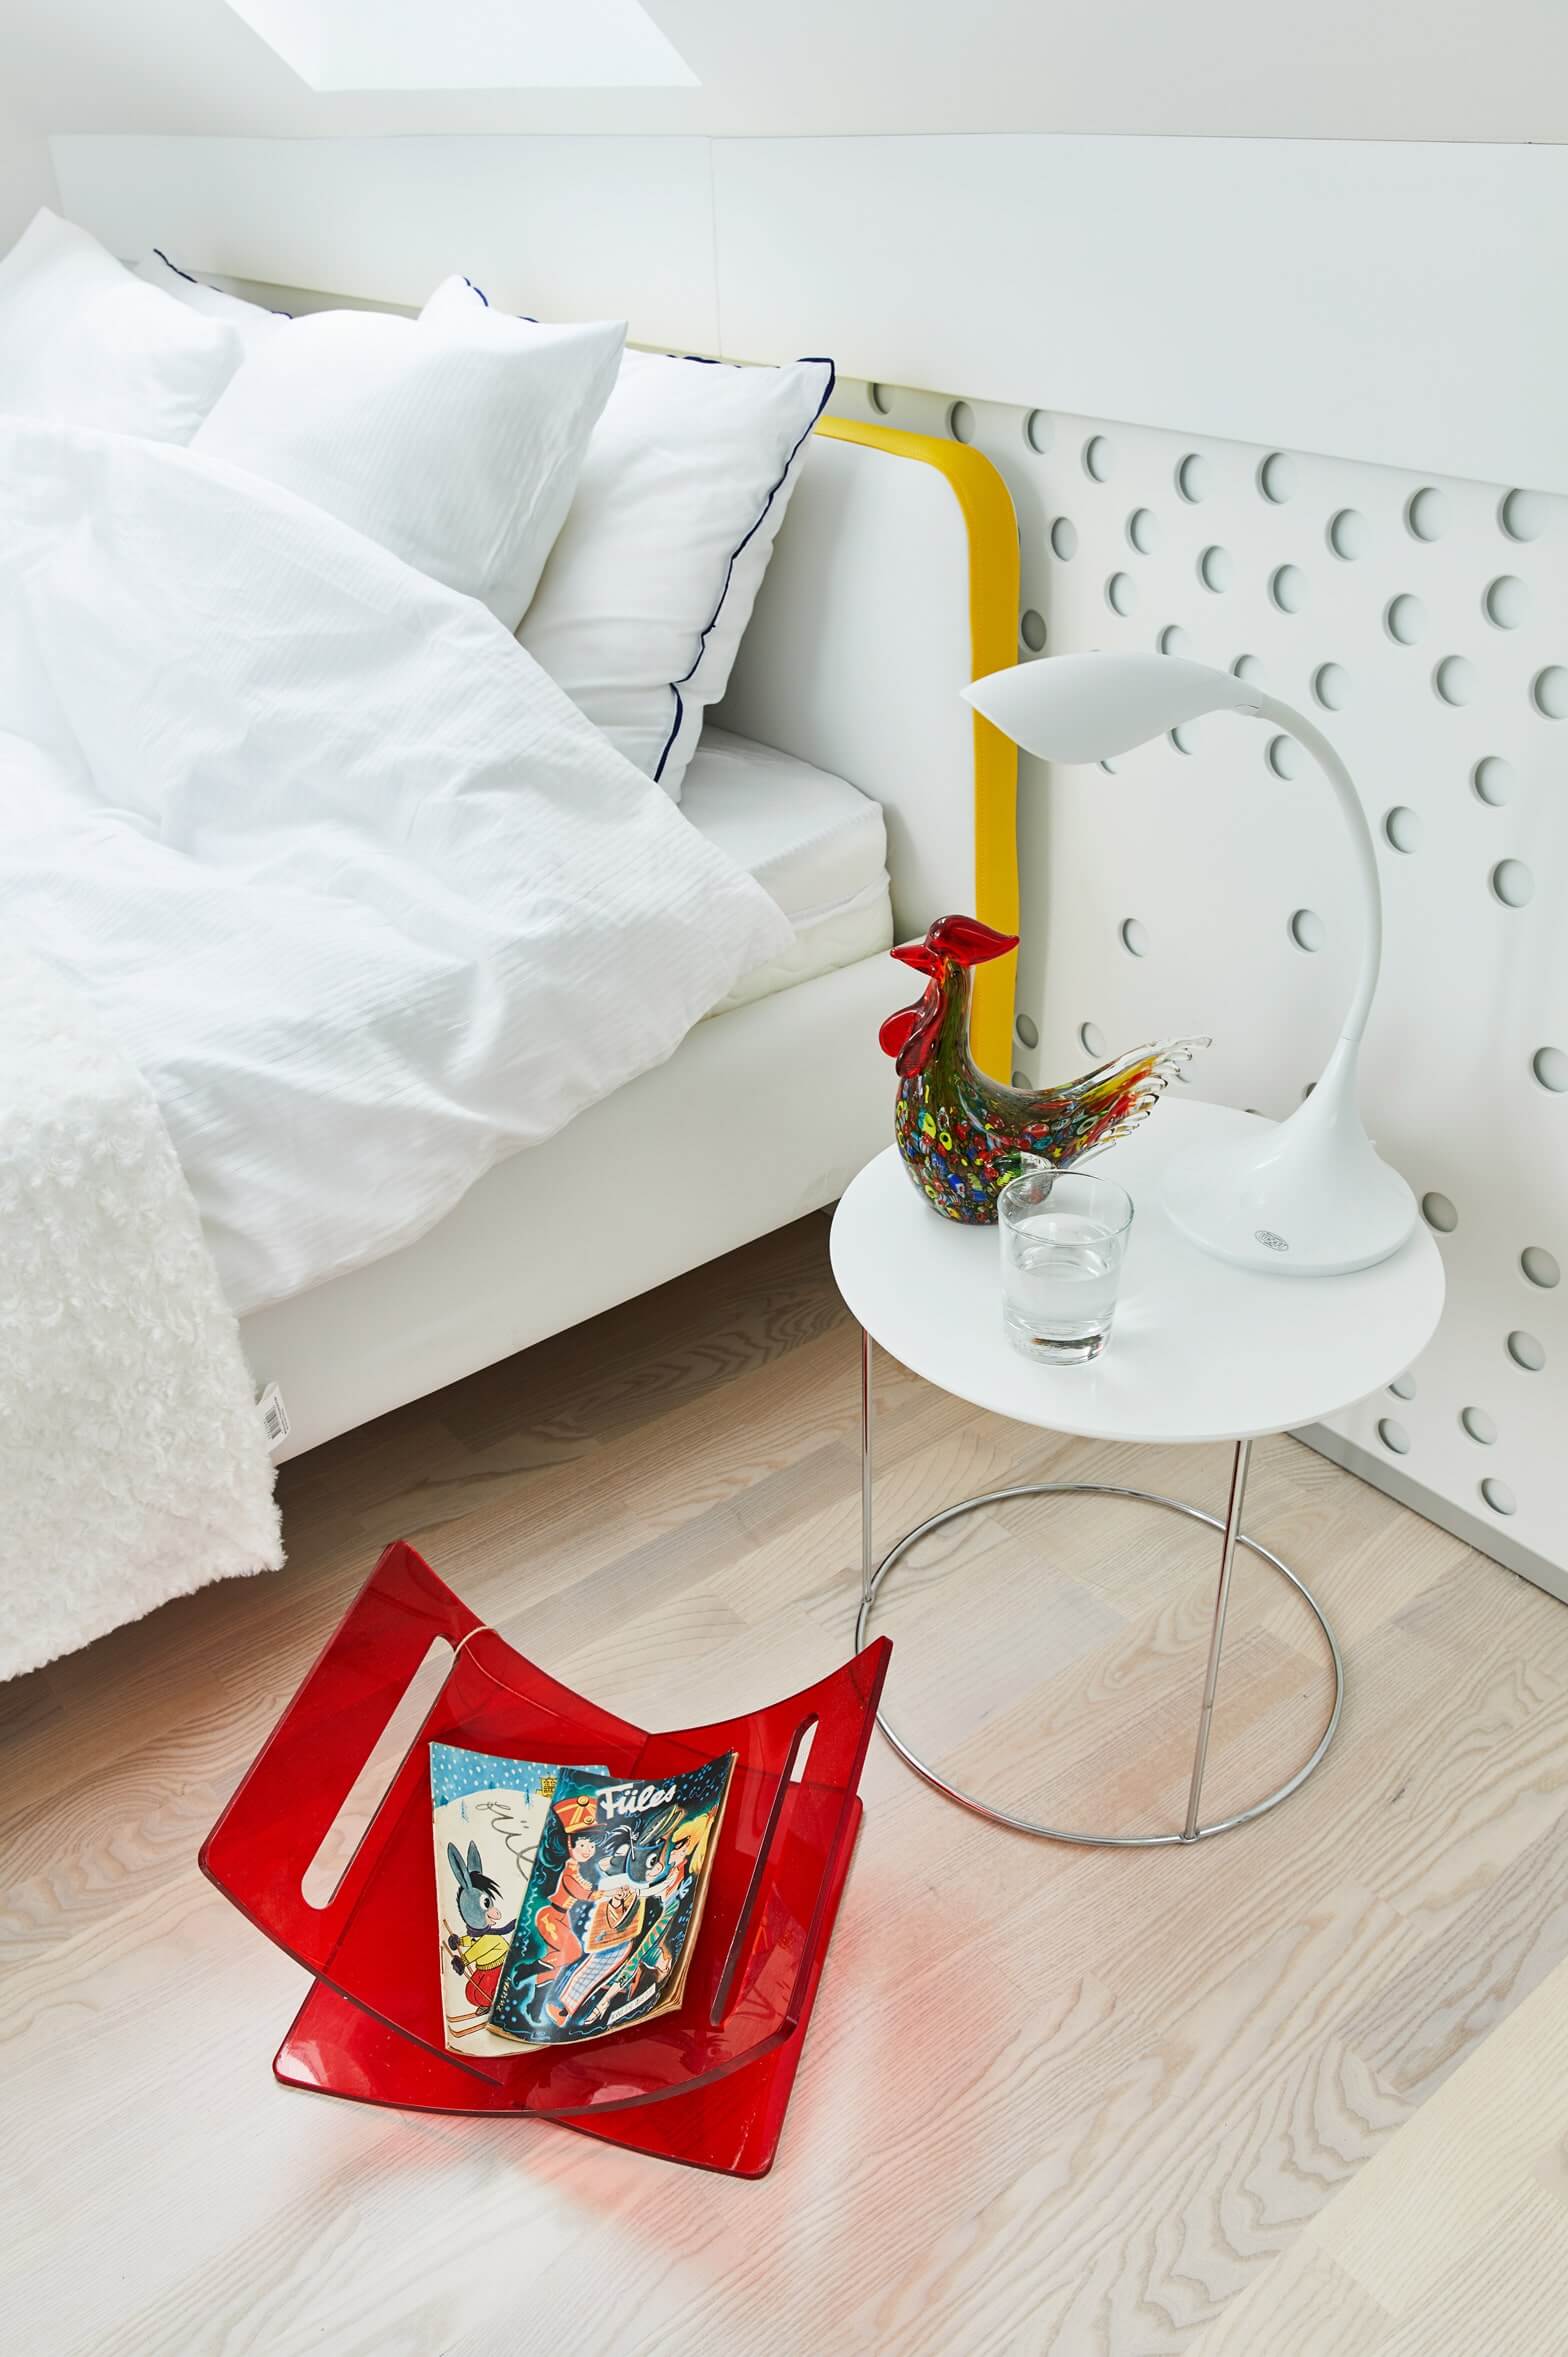 A polka dot wall and a red magazine stand add eye-catchiness to the decor